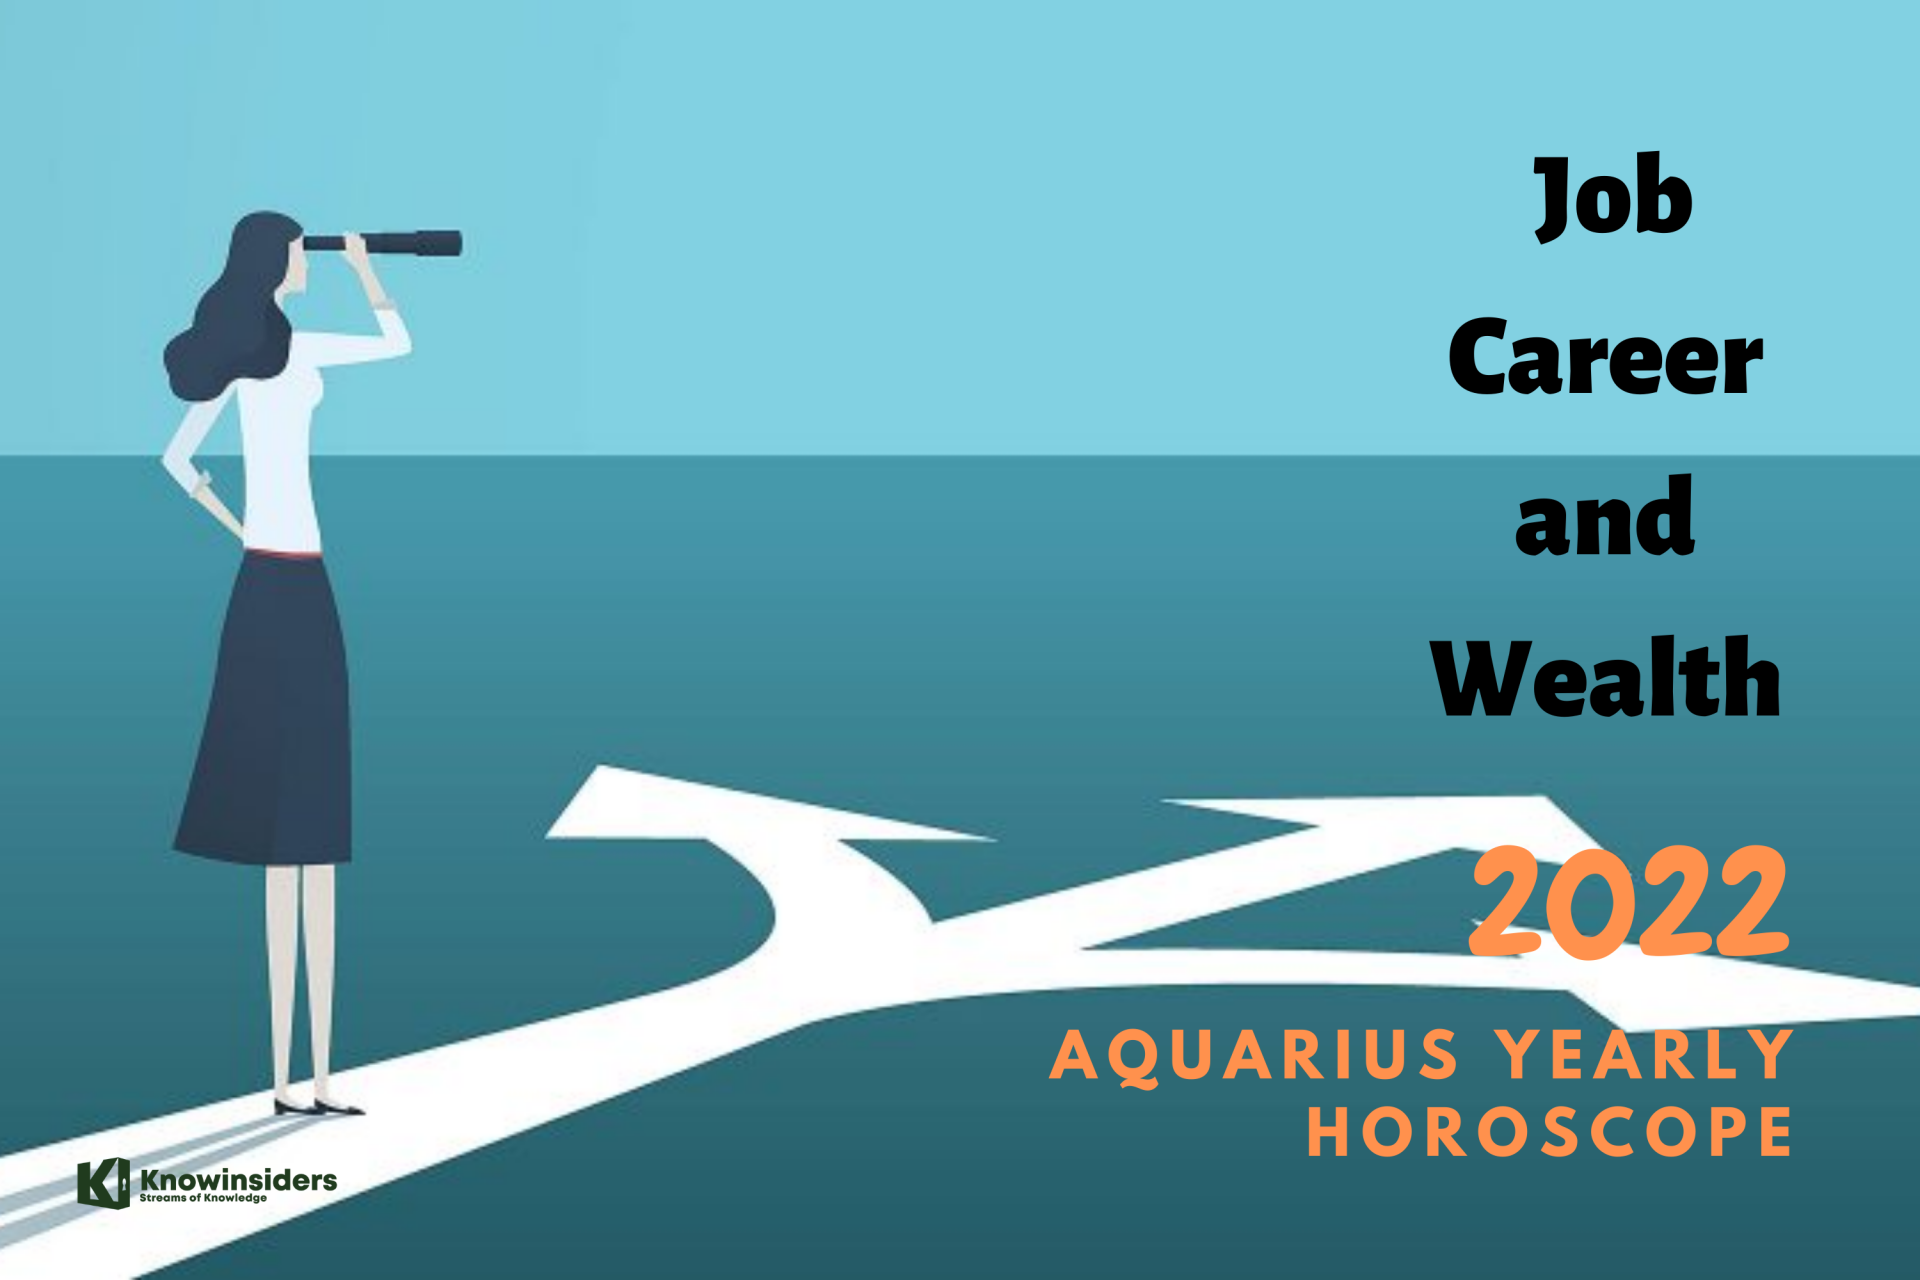 aquarius yearly horoscope 2022 predictions for job career and wealth